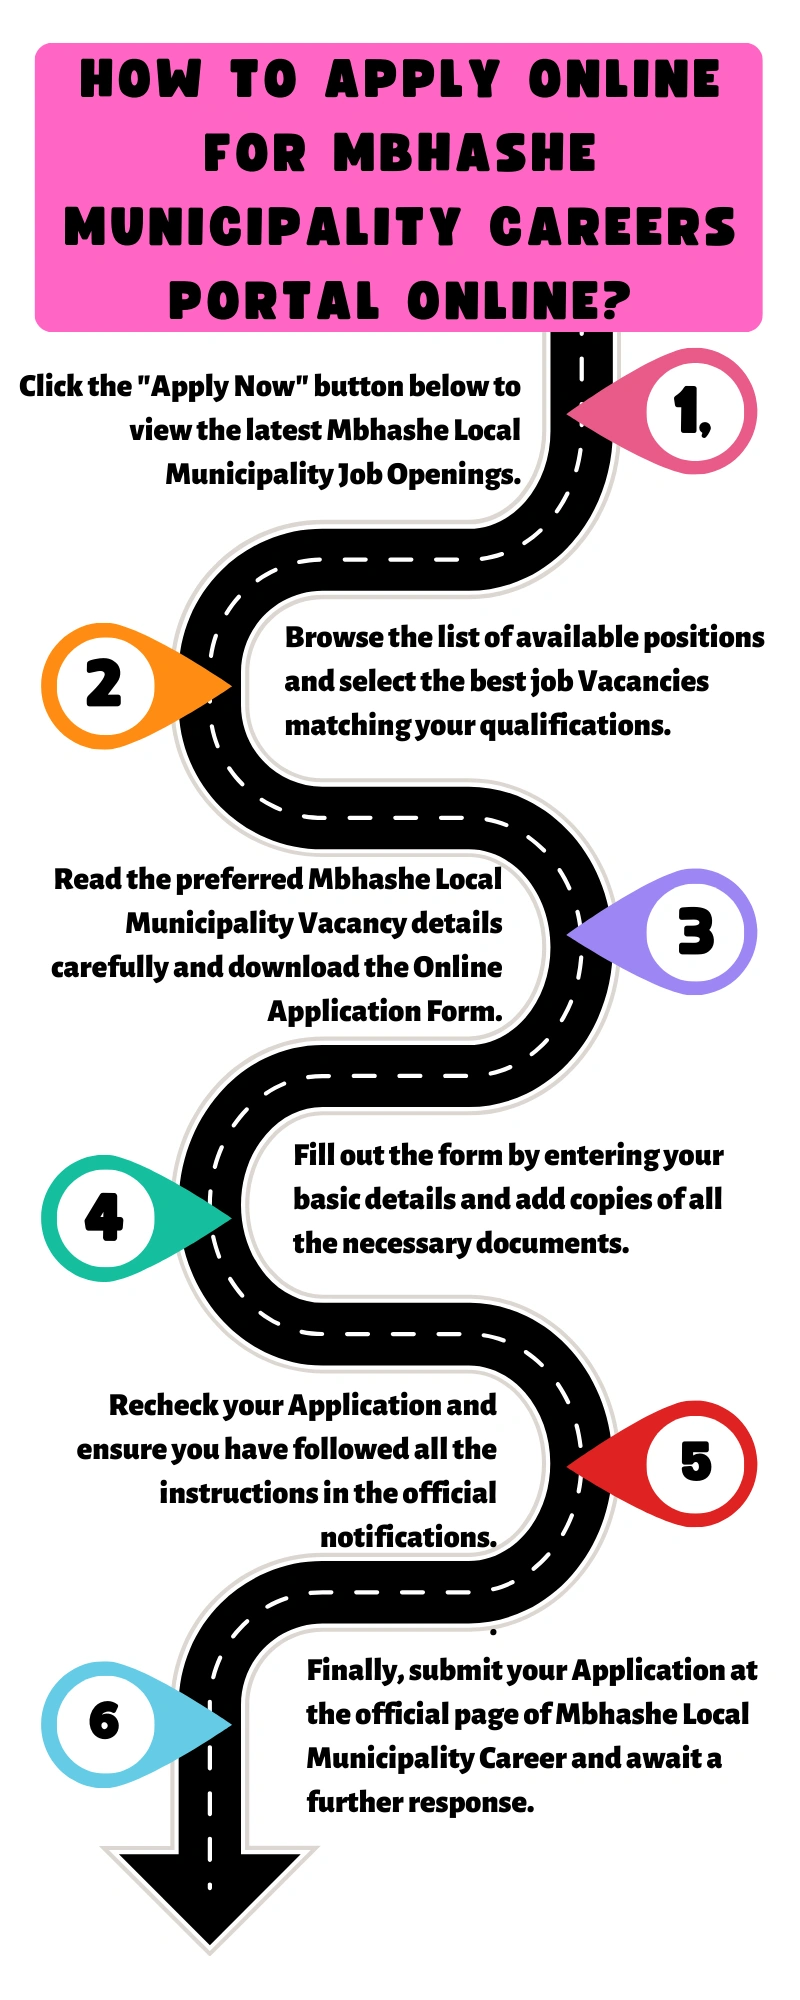 How to Apply online for Mbhashe Municipality Careers Portal Online?